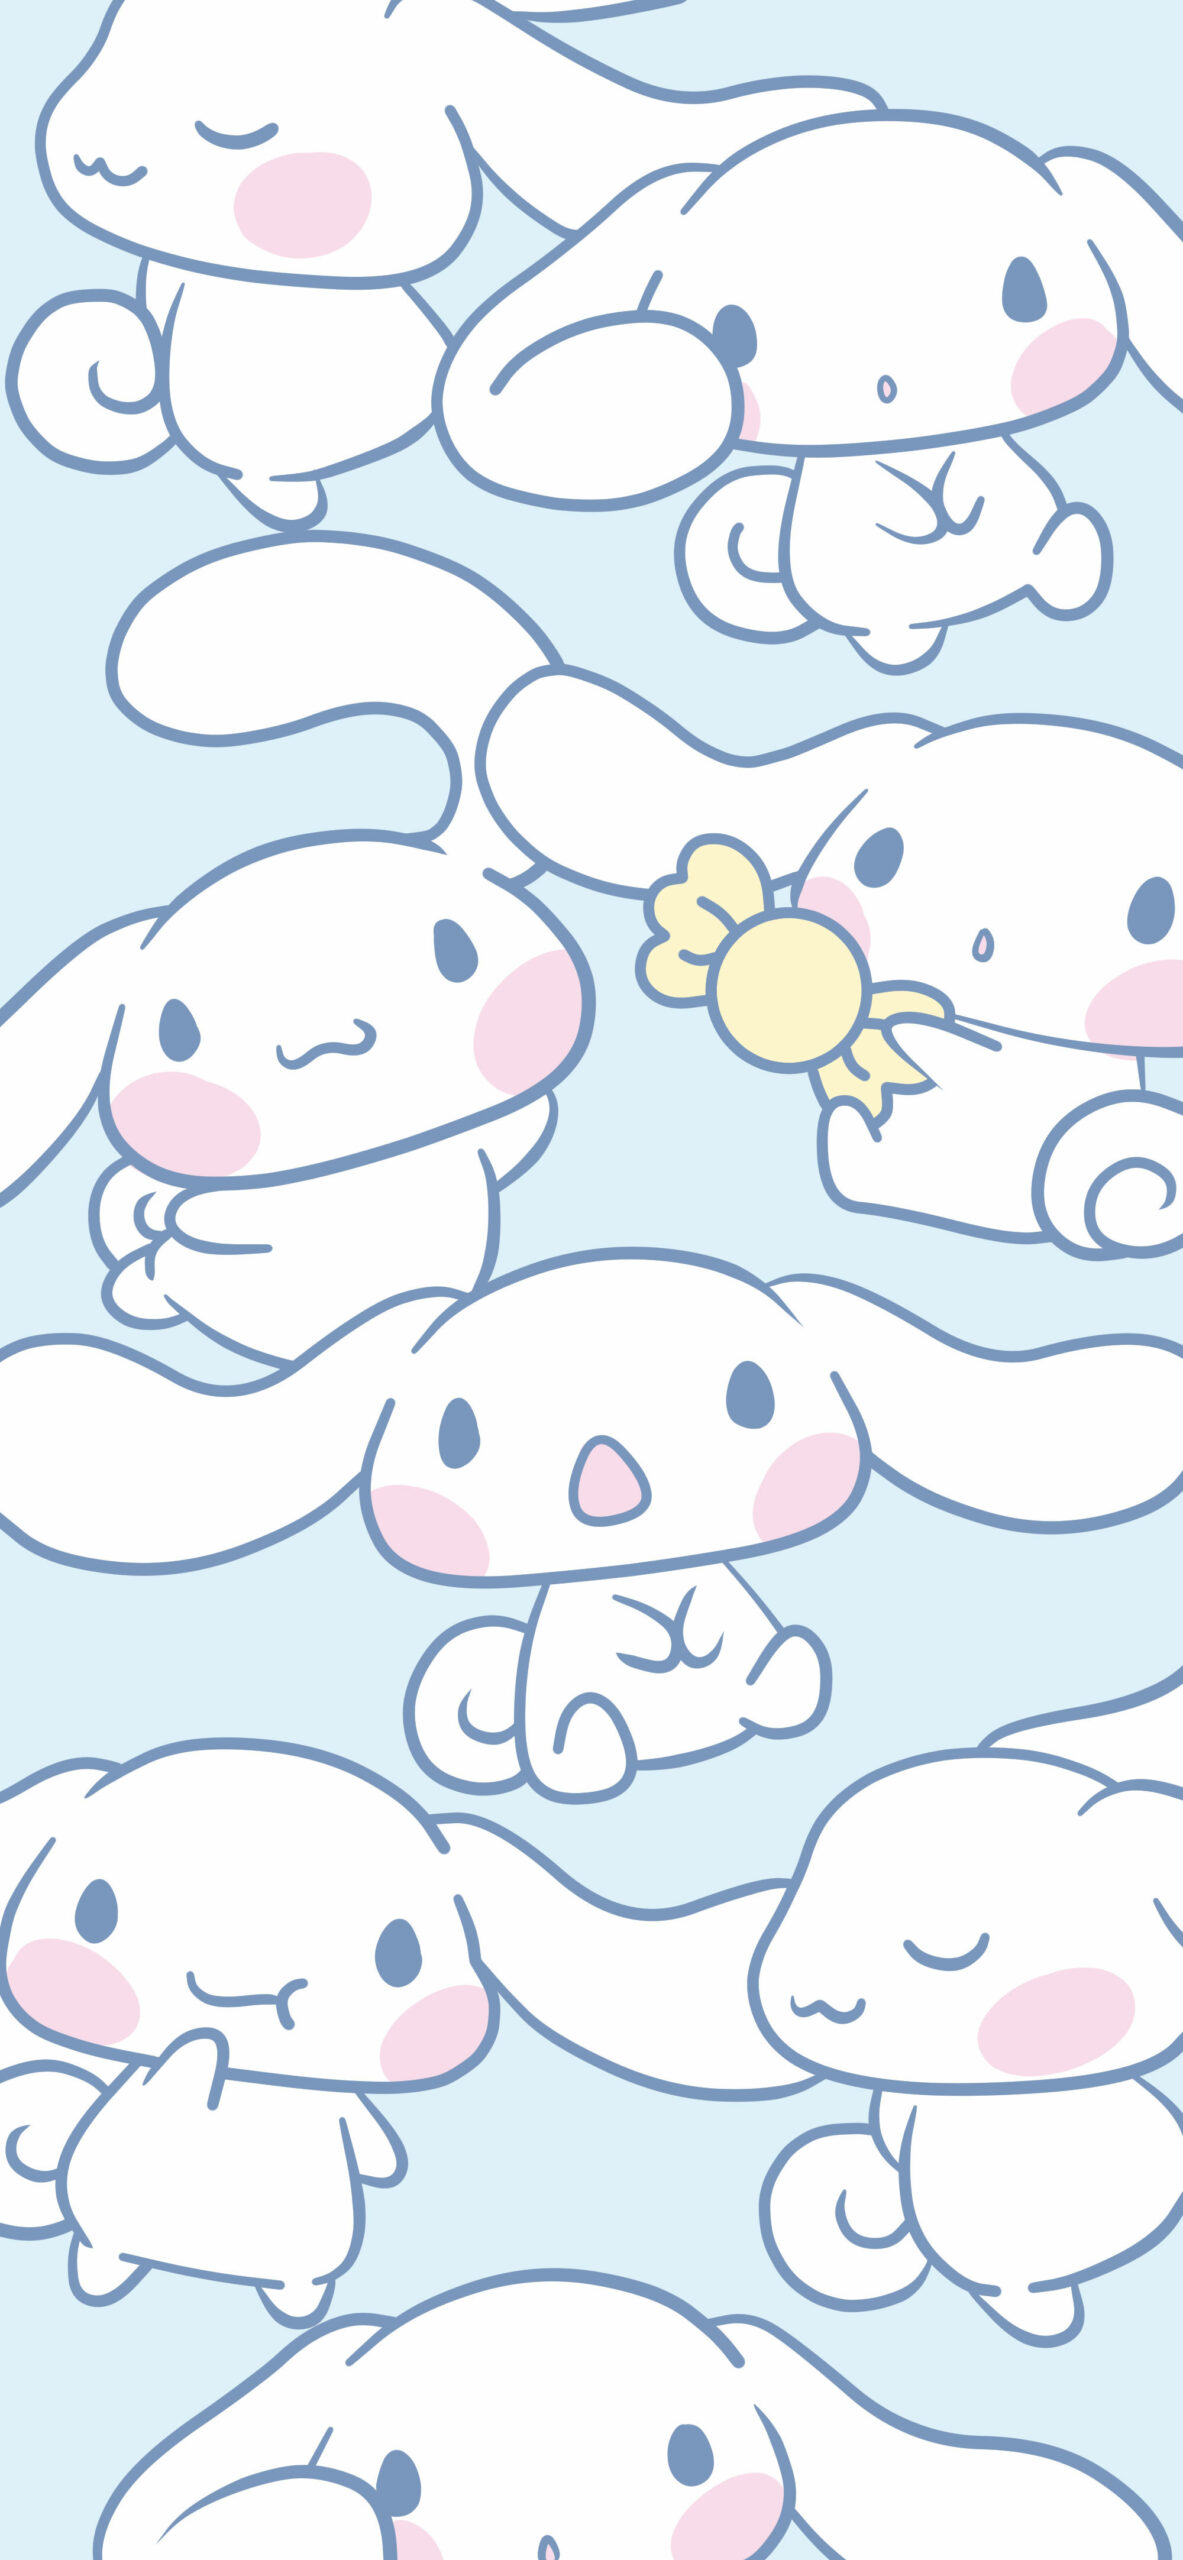 ♡ Be Positive ♡ — SANRIO WALLPAPERS